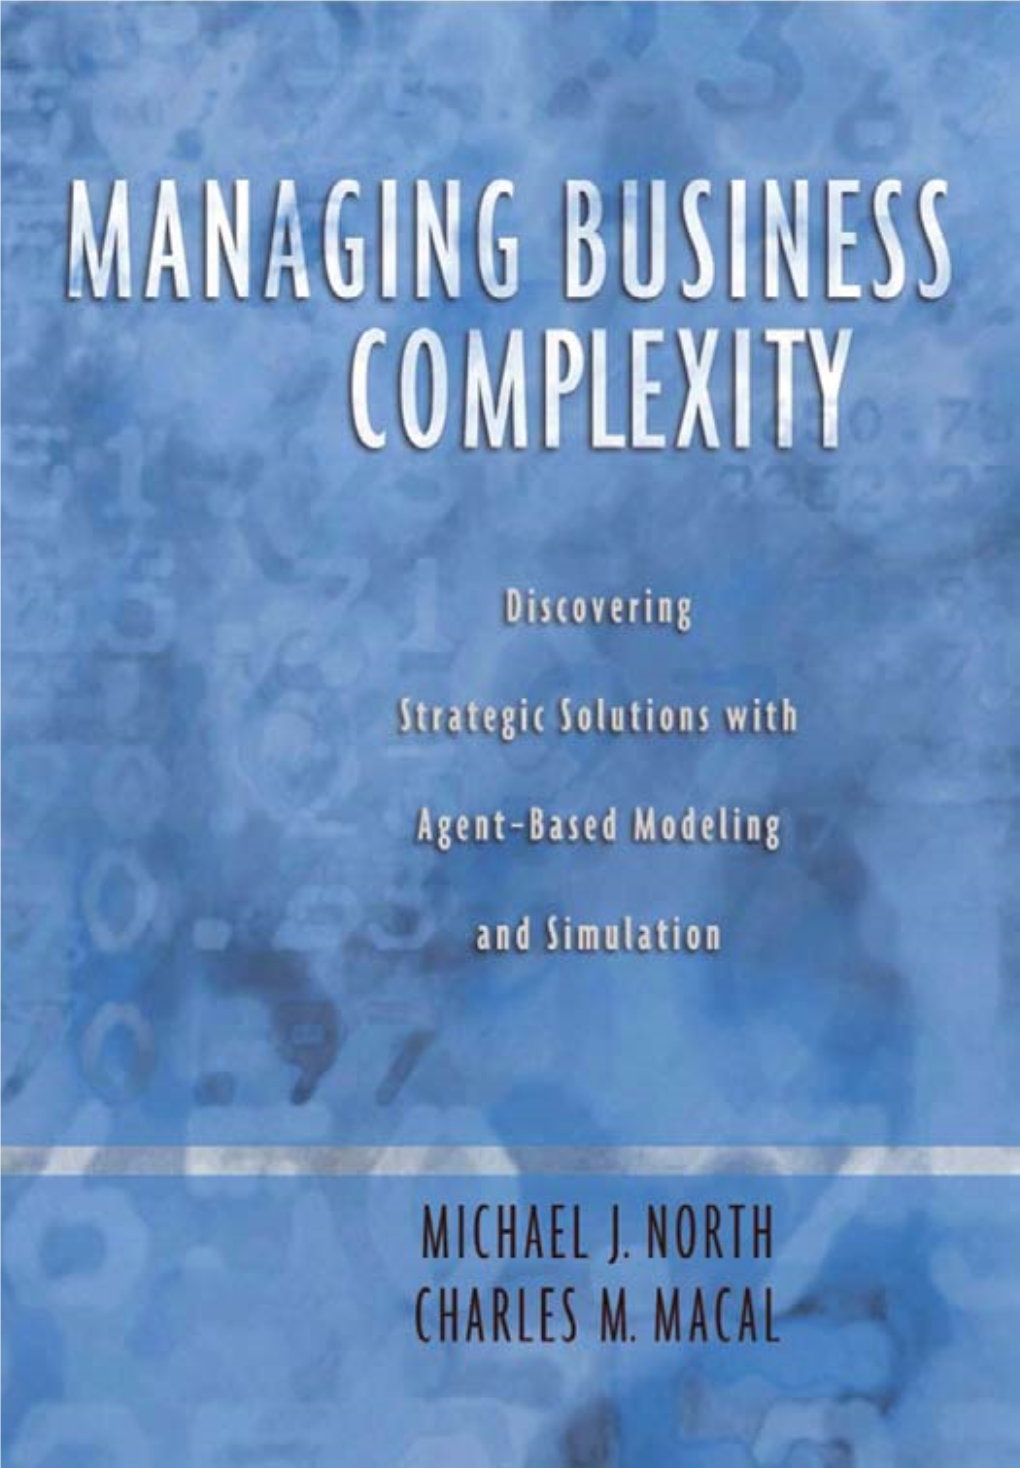 MANAGING BUSINESS COMPLEXITY This Page Intentionally Left Blank MANAGING BUSINESS COMPLEXITY Discovering Strategic Solutions with Agent-Based Modeling and Simulation